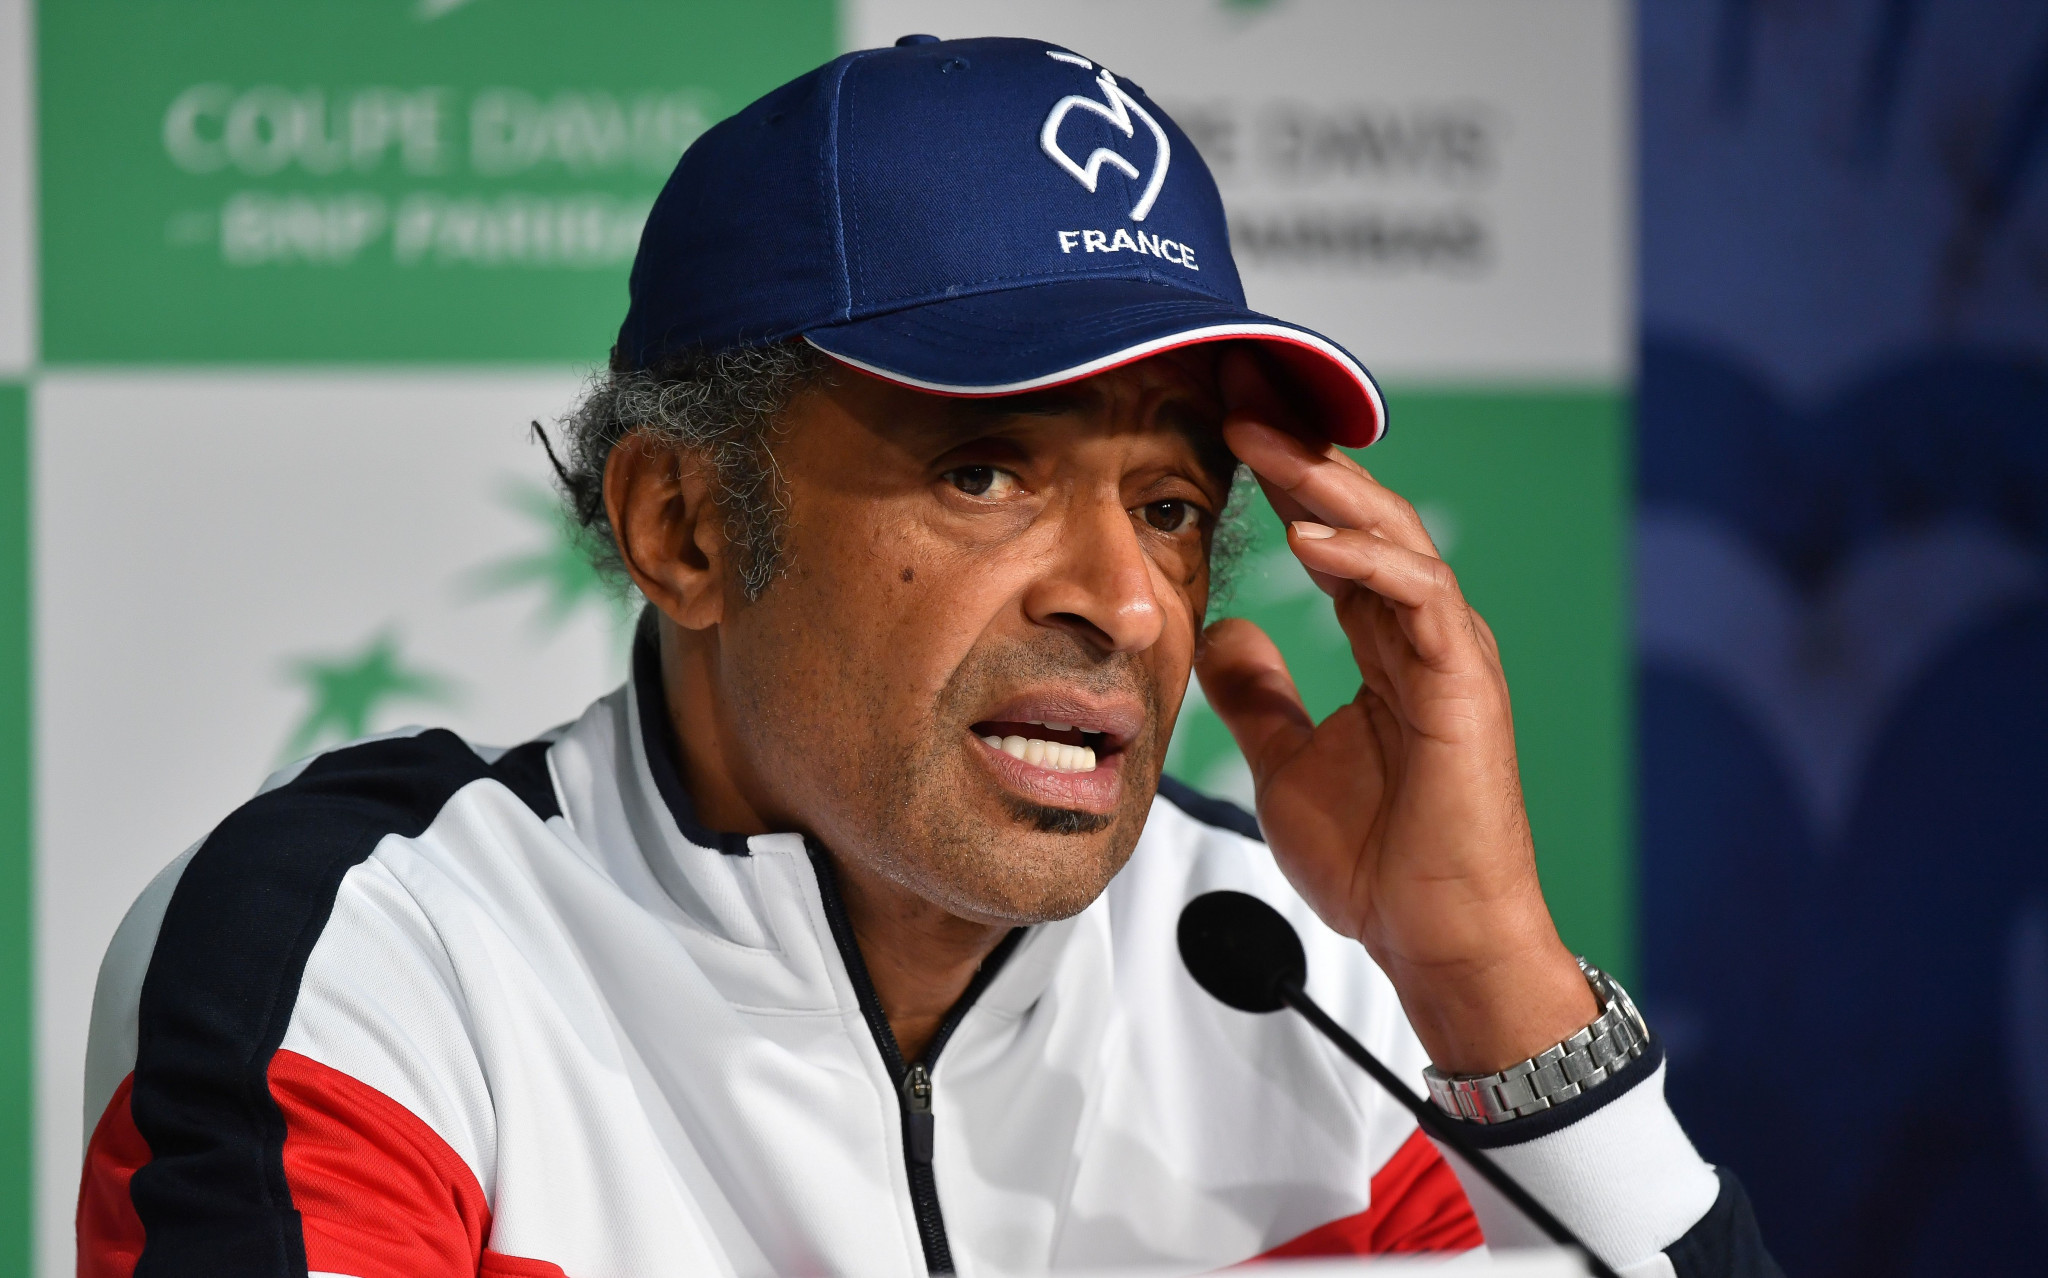 This year will be Yannick Noah's final captaincy of the French Davis Cup team as Amelie Mauresmo is due to take over in 2019 ©Getty Images